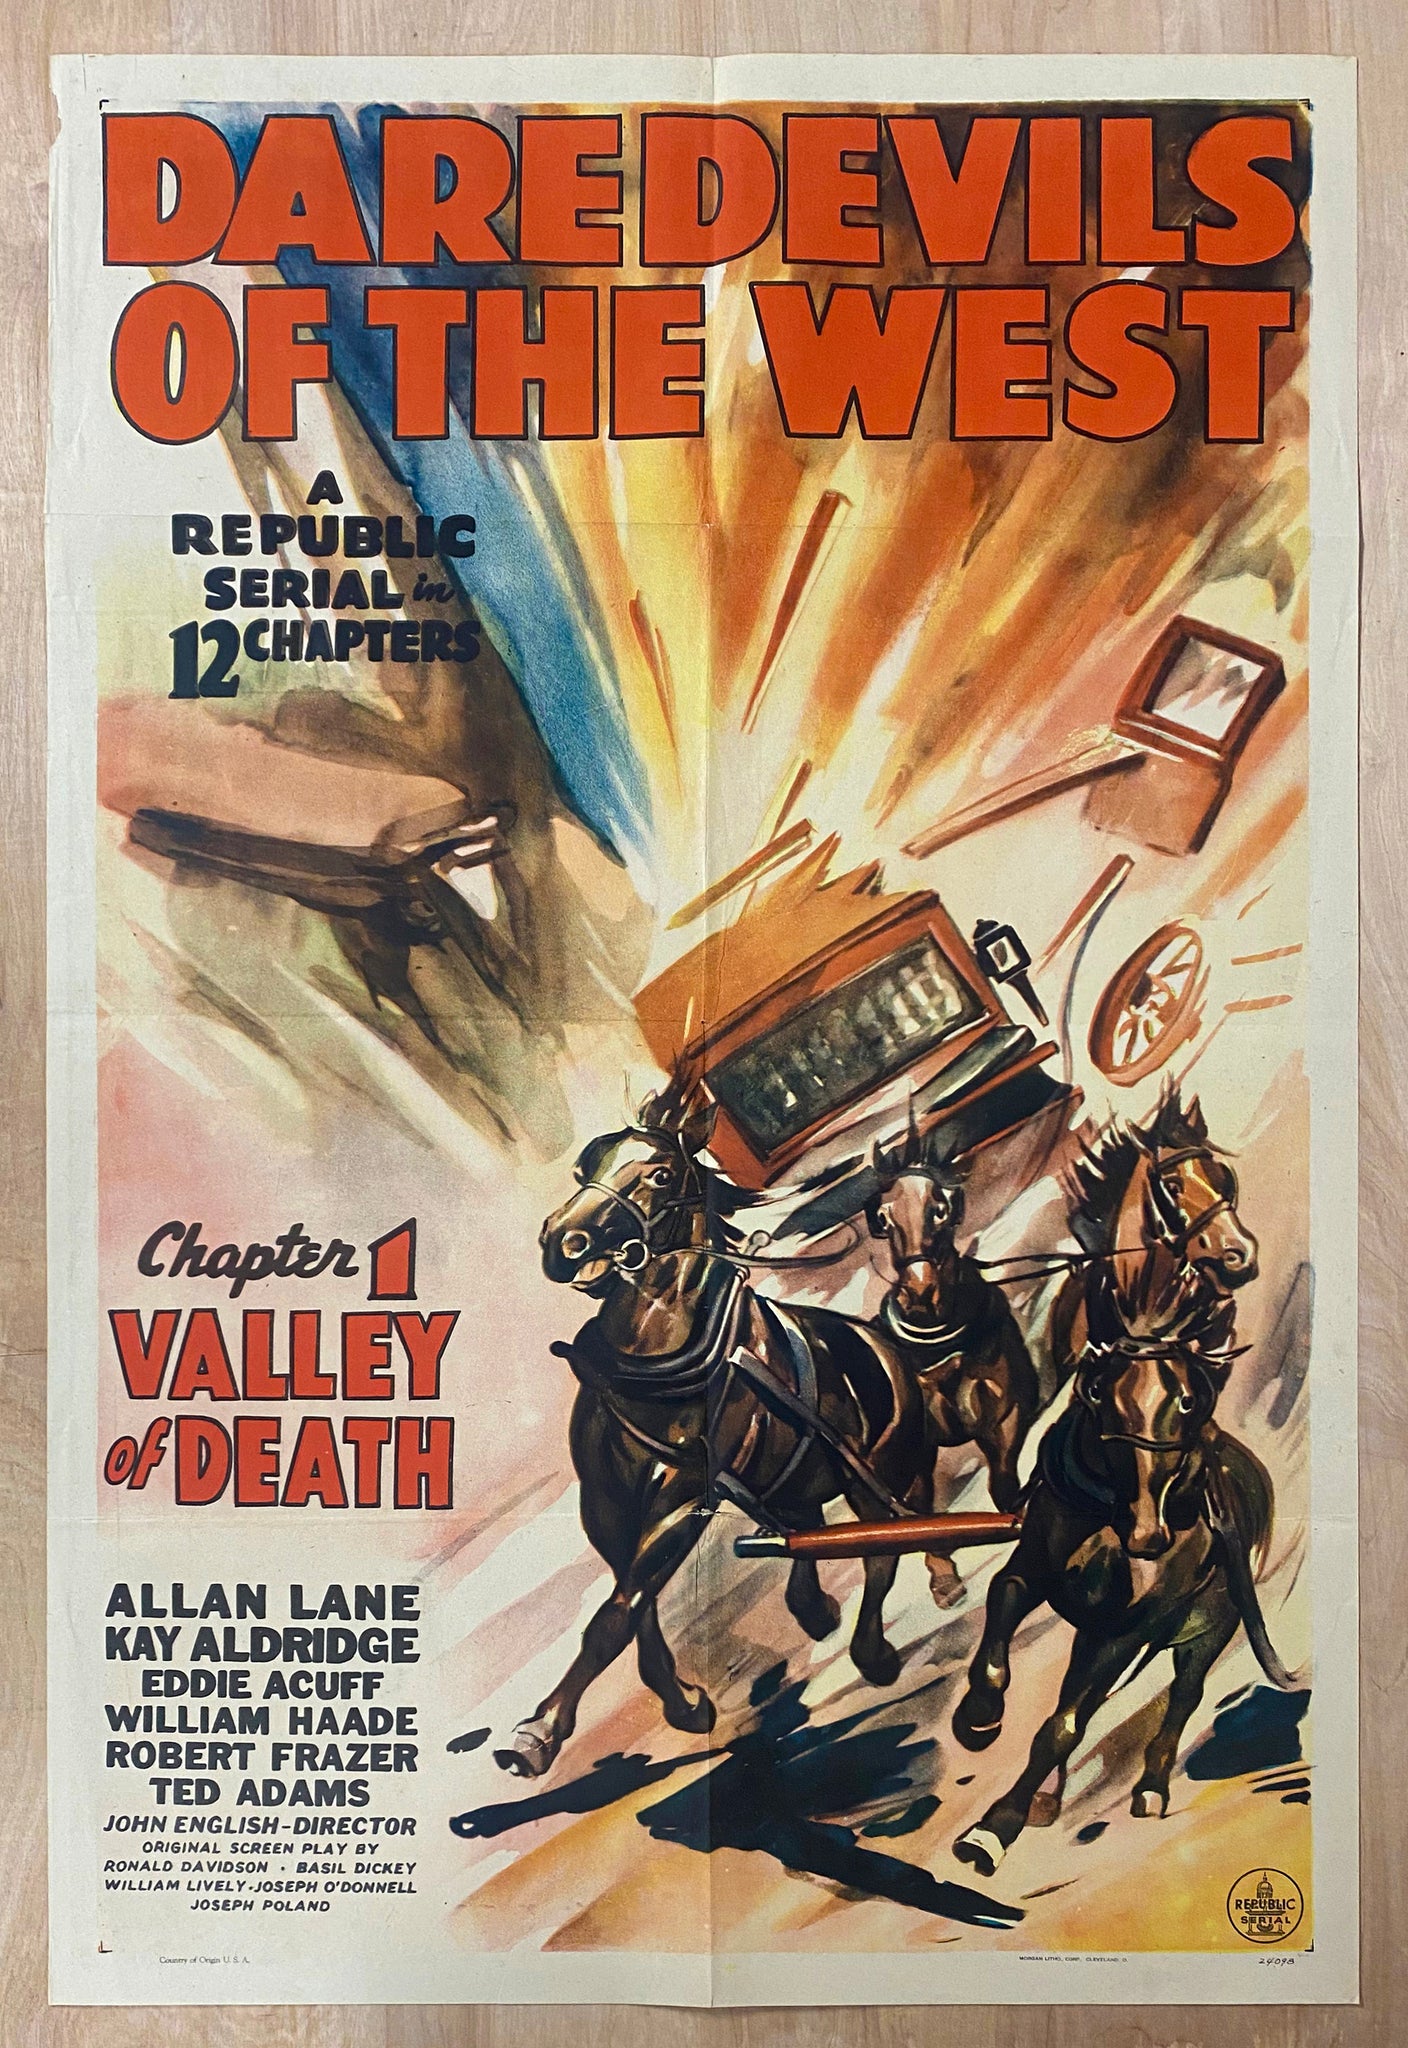 1943 Daredevils of the West One Sheet Movie Republic Serial Valley of Death